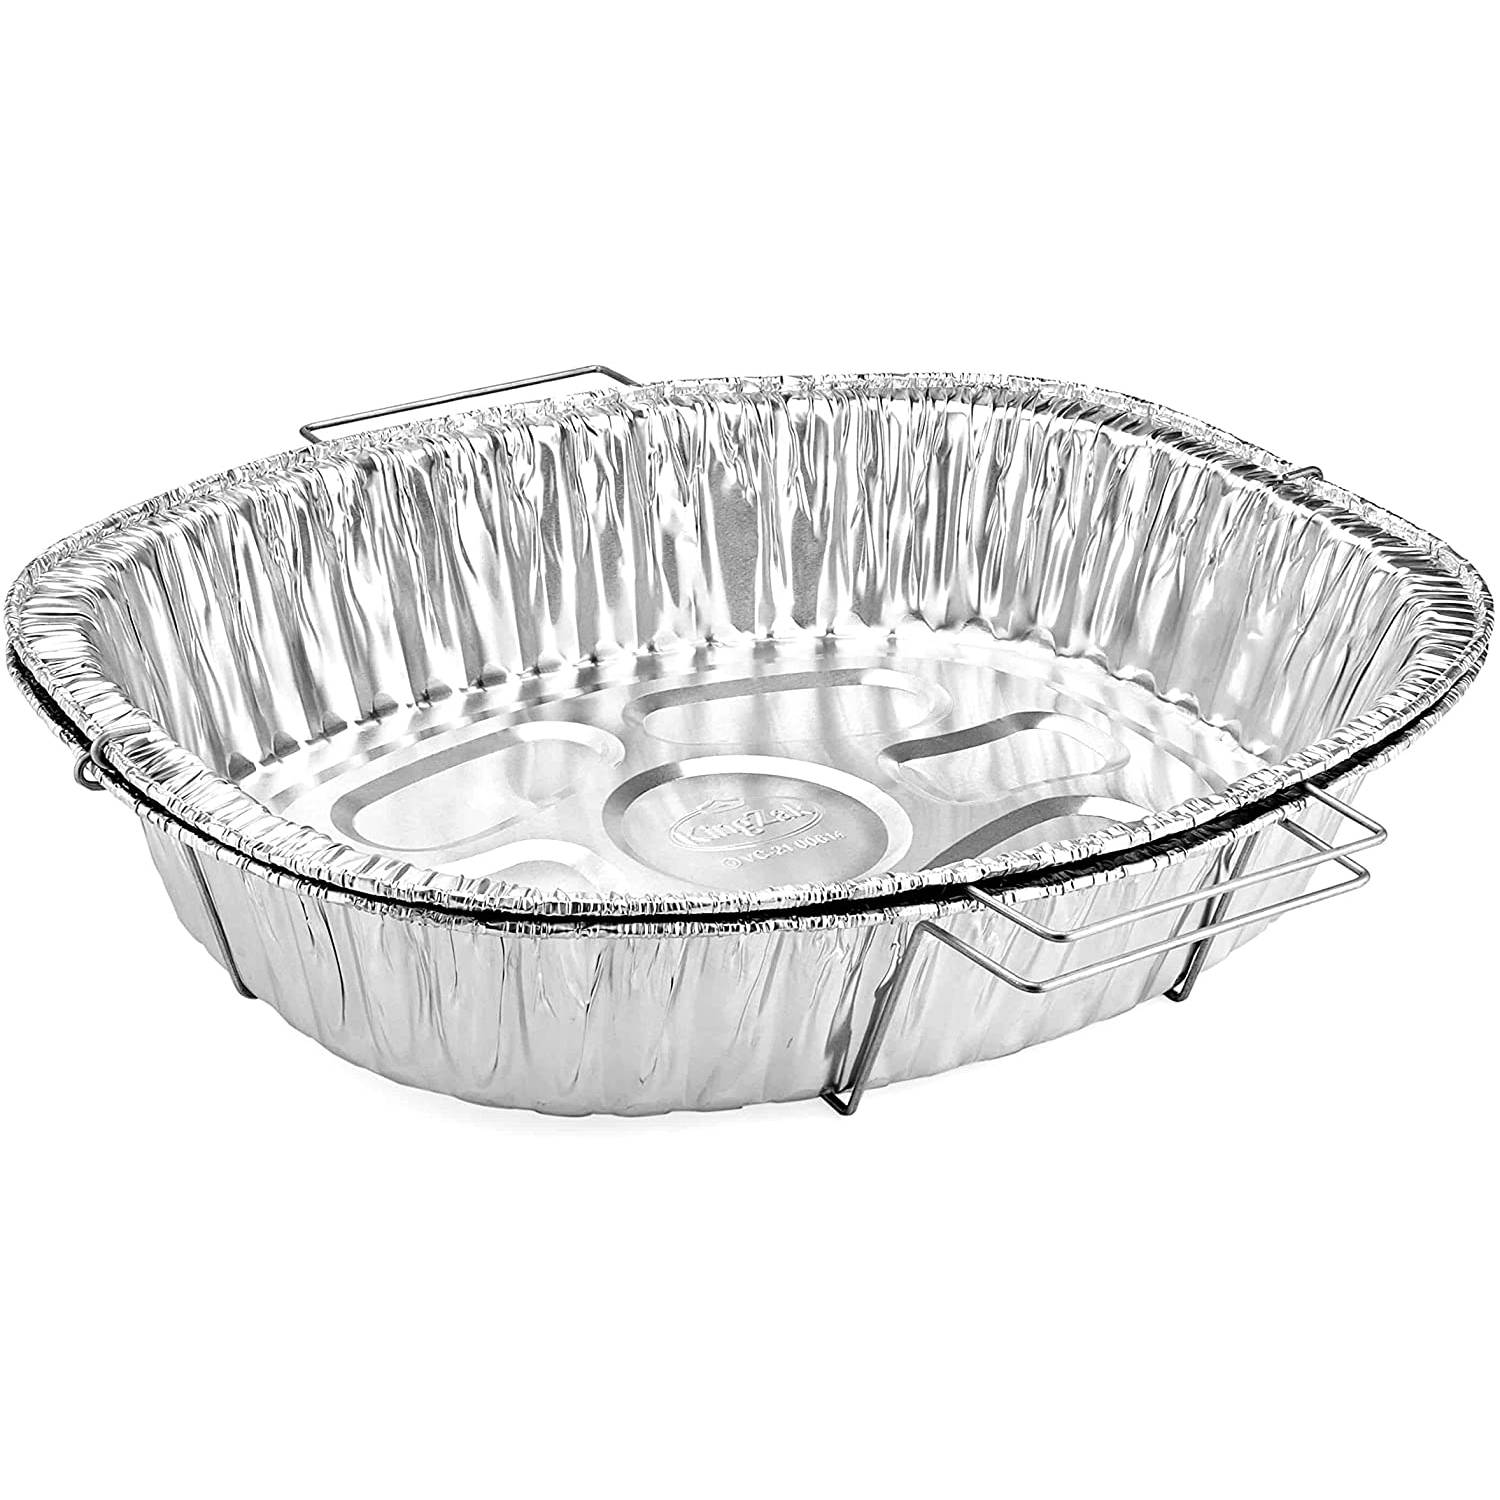 Durable Disposable Aluminum Foil Steam Roaster Pans, Full Size Deep, Heavy  Duty Baking Roasting Broiling 17 X 12.5 X 3 Thanksgiving 30